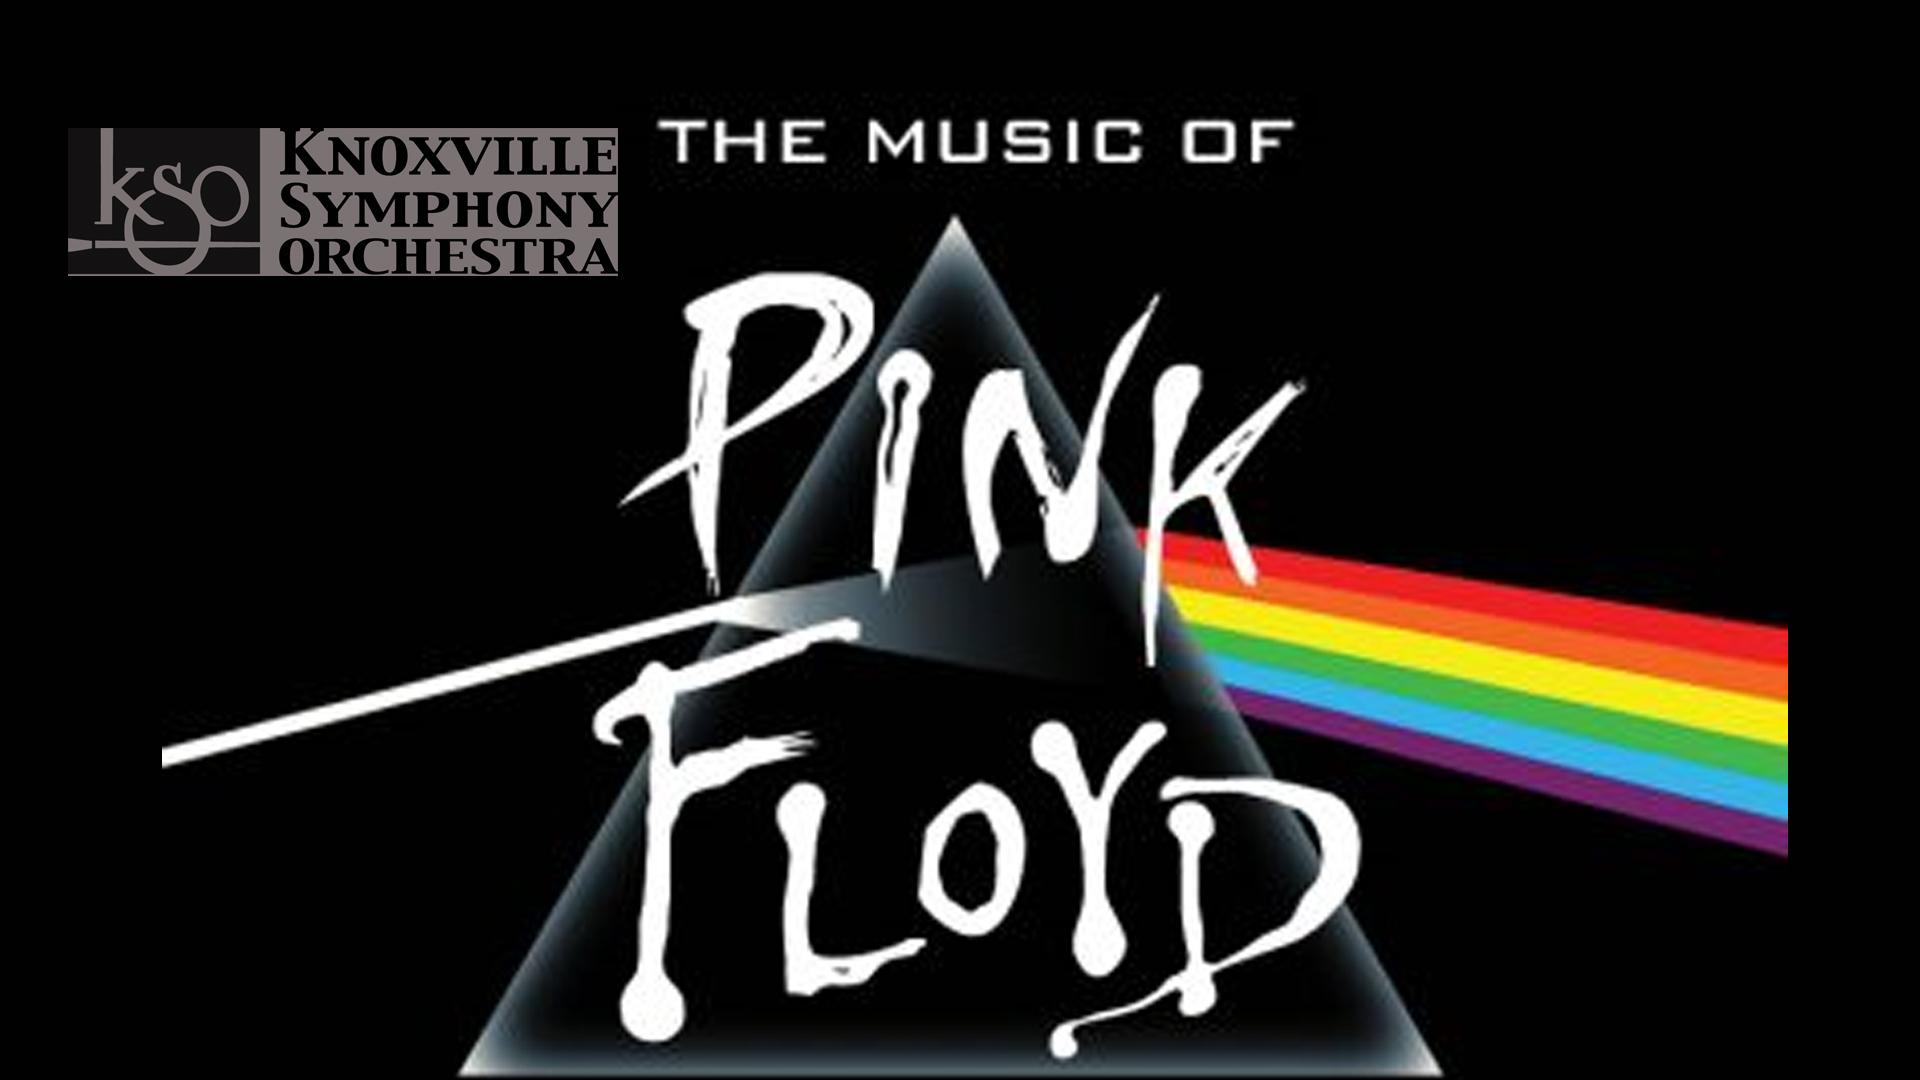 Knoxville Symphony Orchestra: Music of Pink Floyd